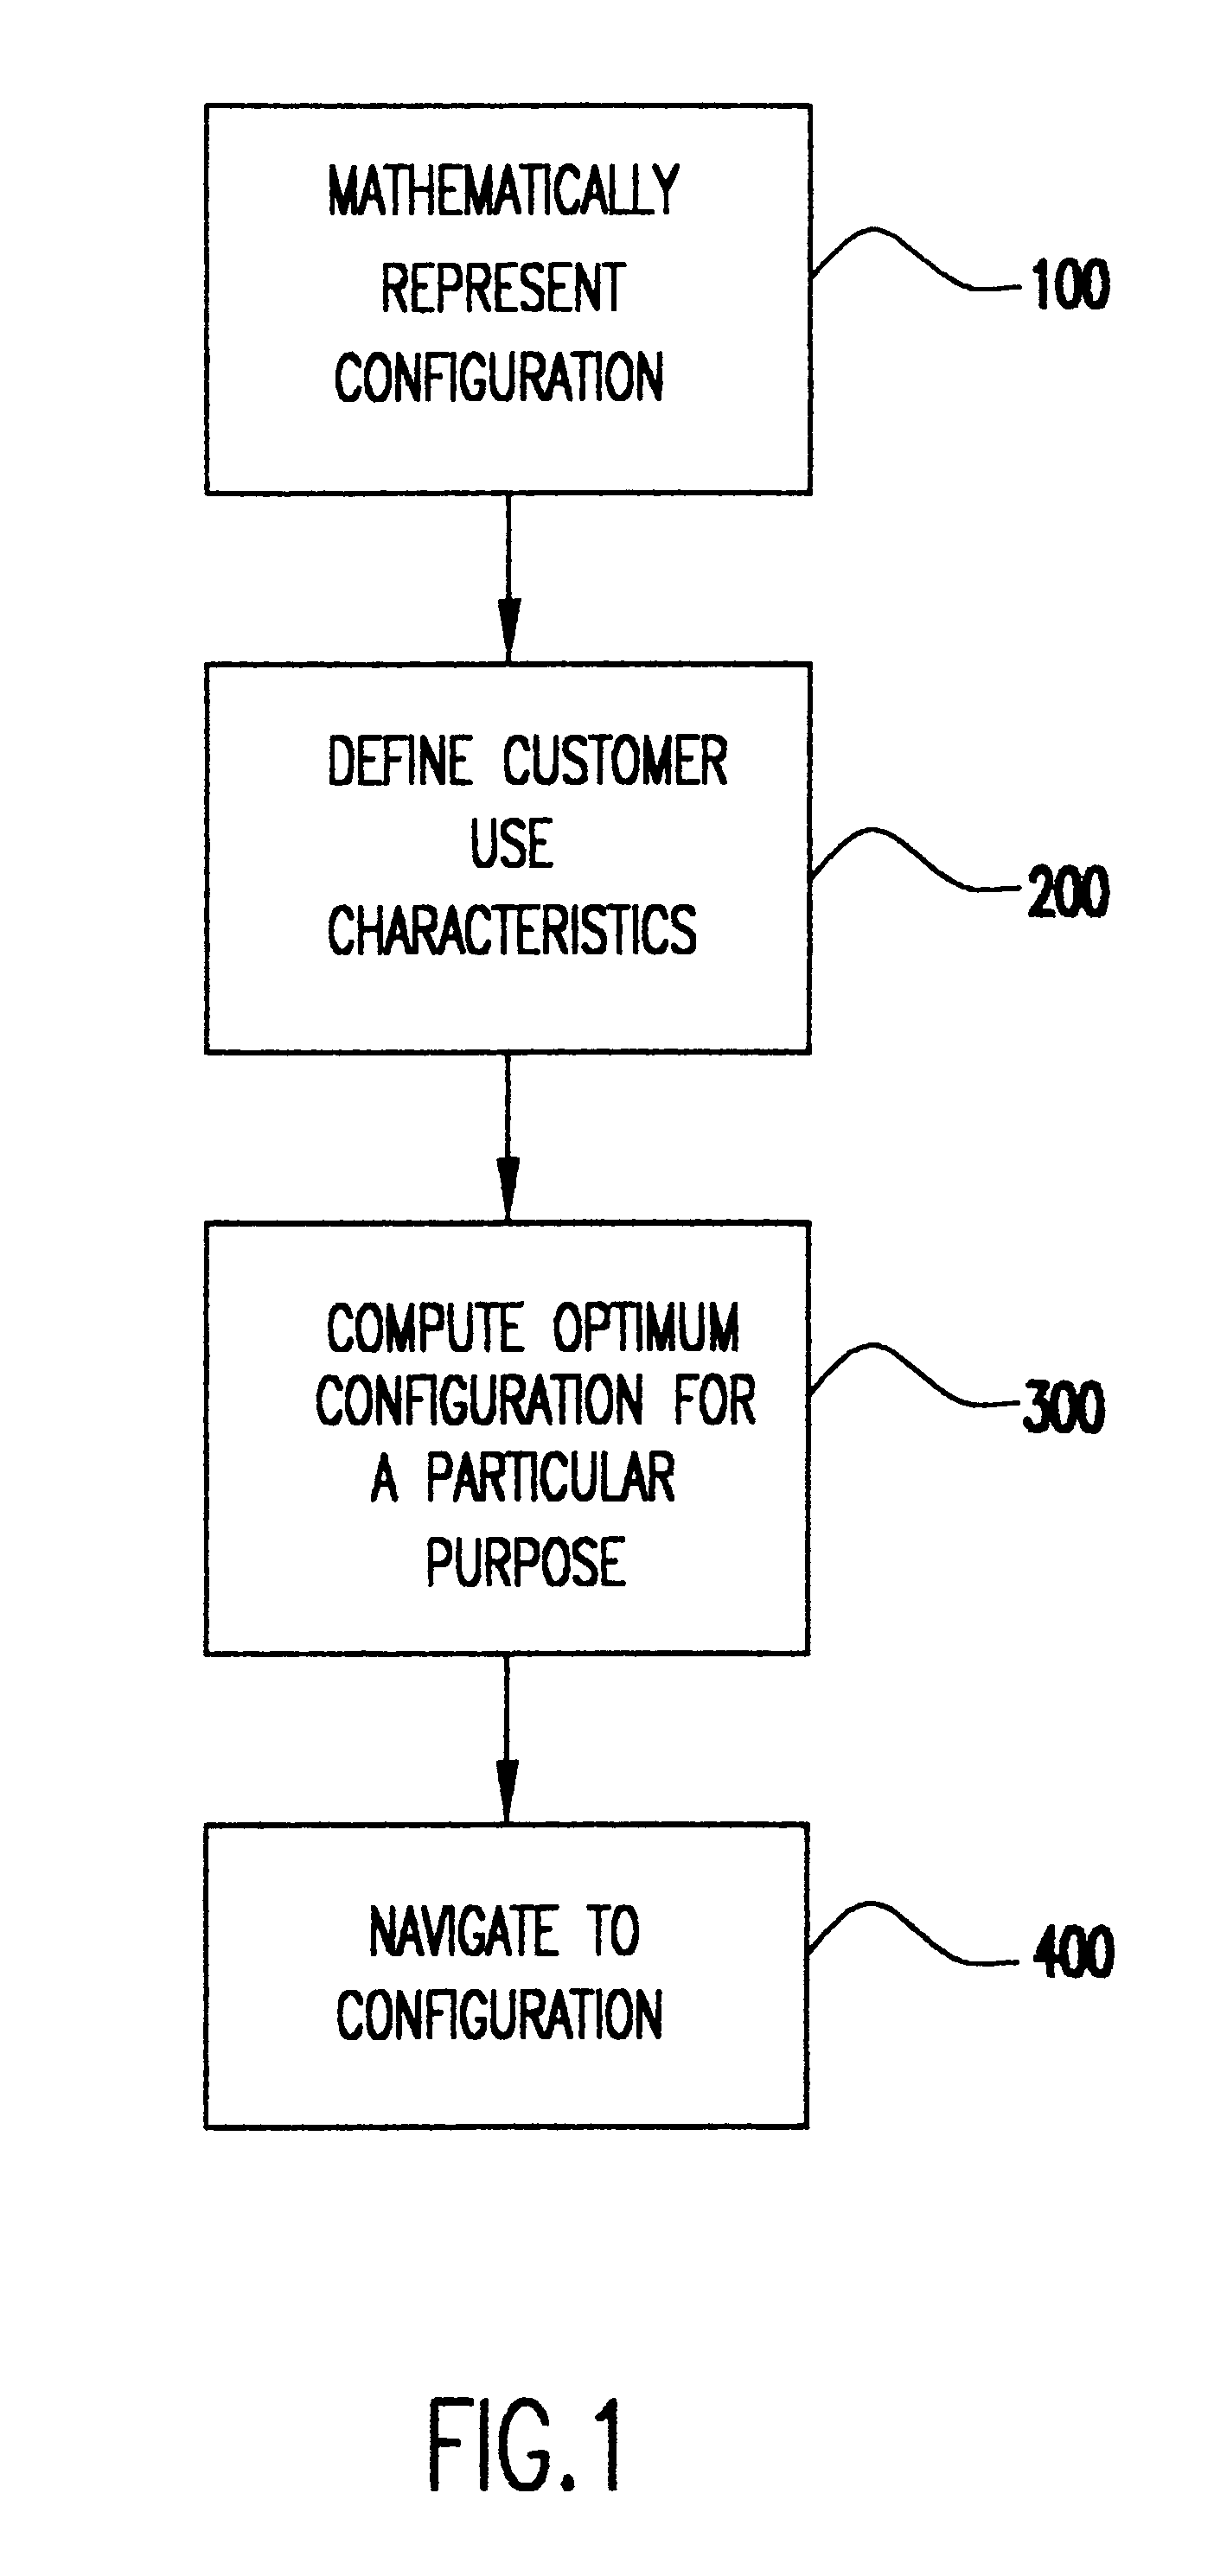 Specifying complex device configeration through use characteristics